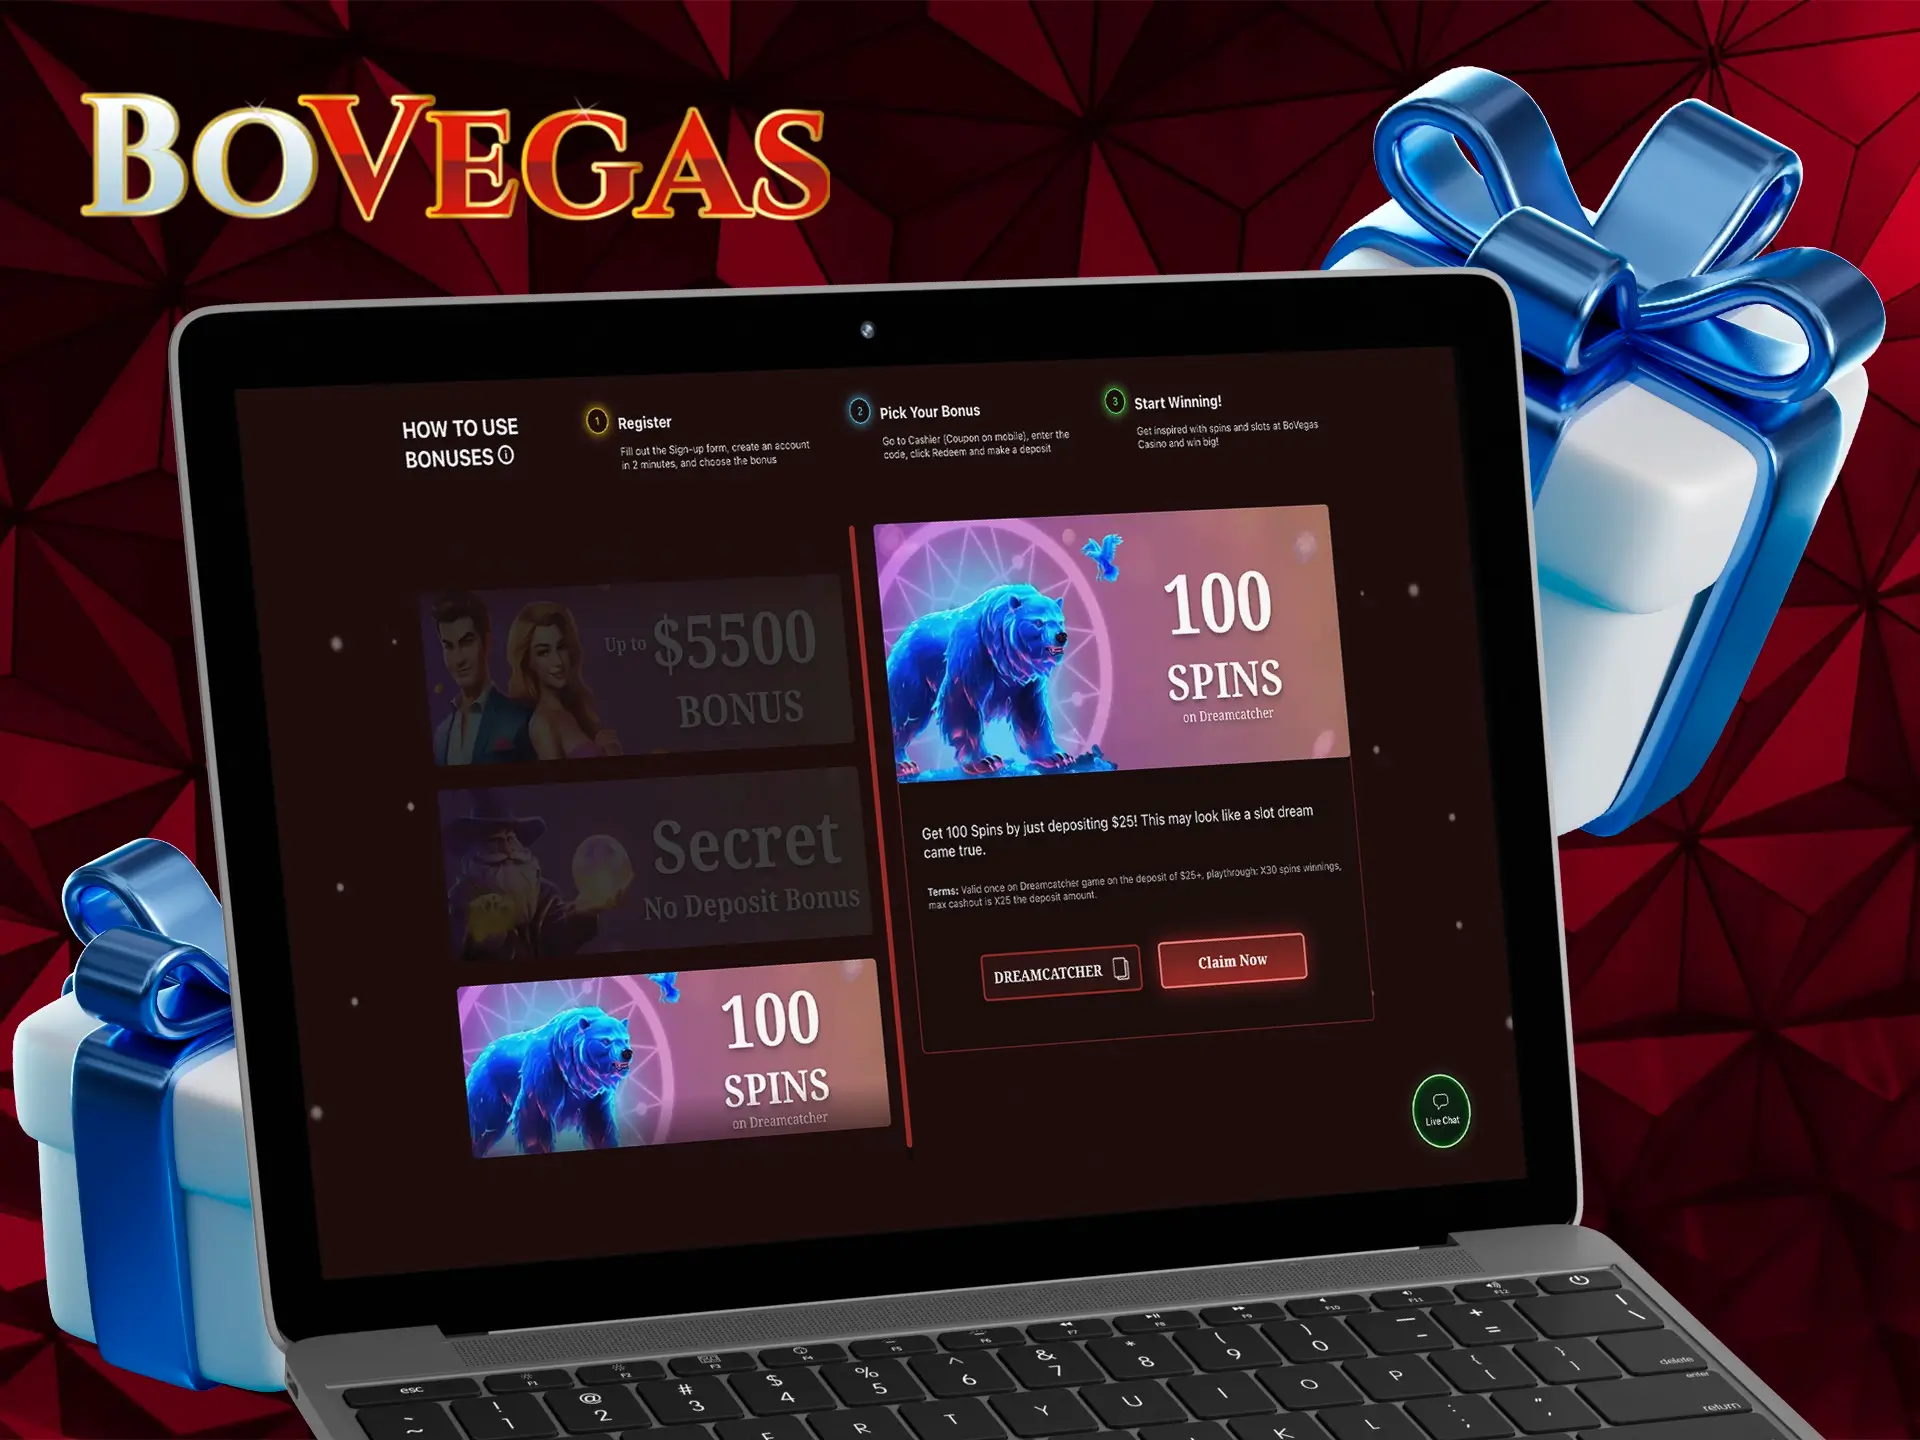 The variety of promo codes from BoVegas Casino will interest any slot gambler.